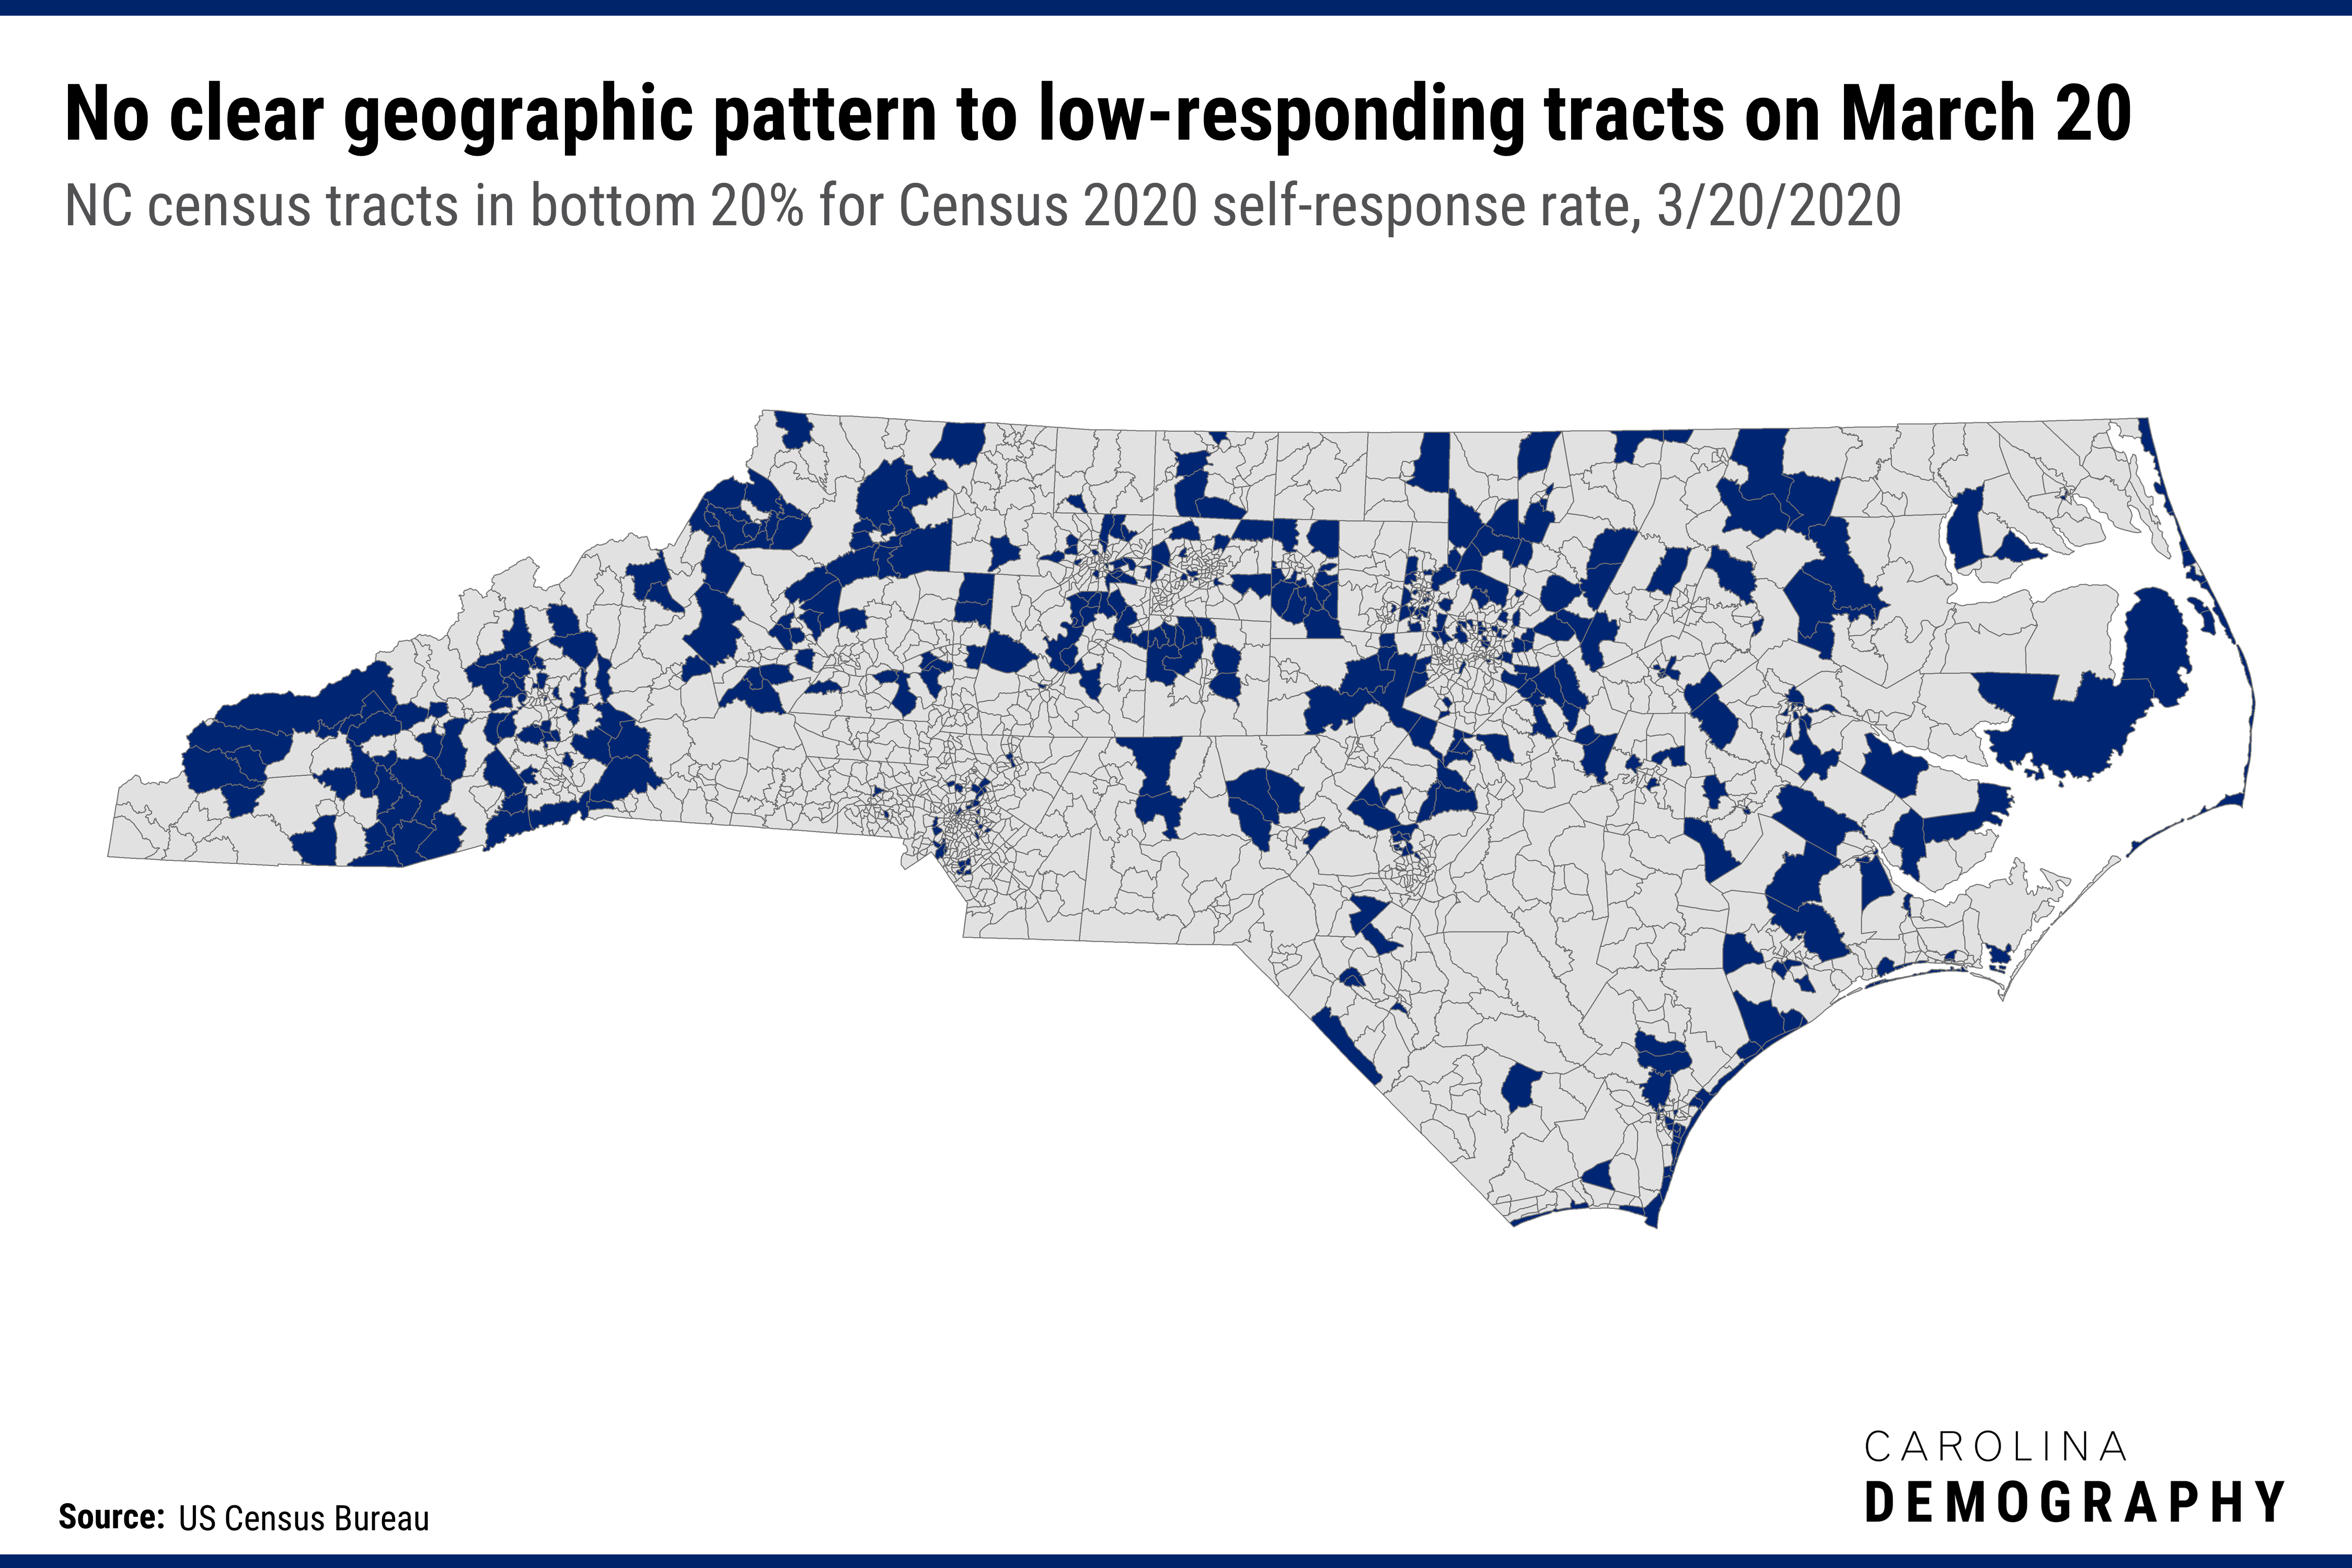 Map of NC showing no clear geographic pattern for lowest 20% responding census tracts on March 20.